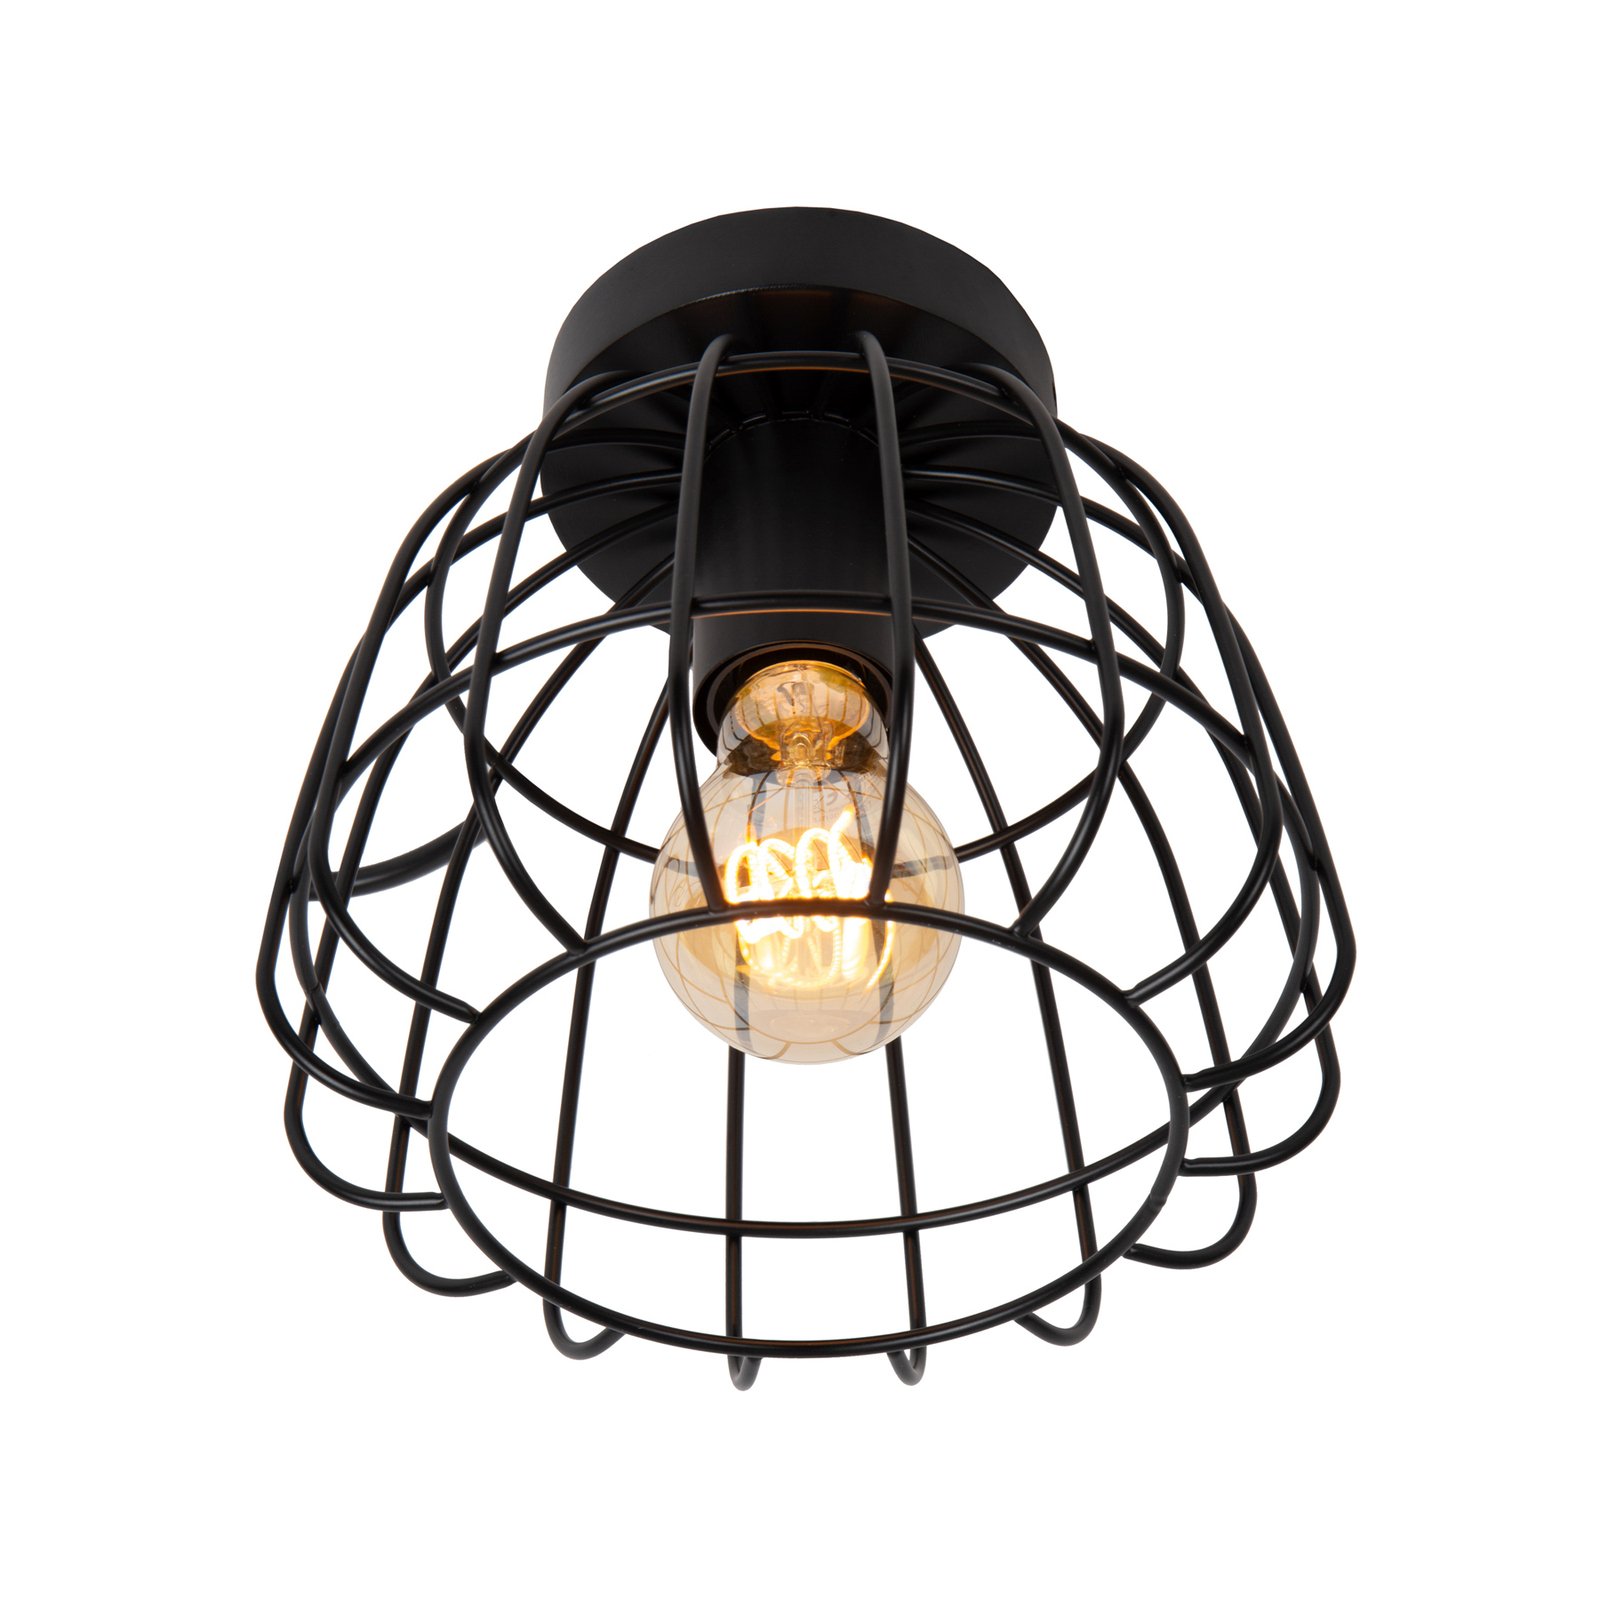 Filox ceiling light, cage lampshade, black